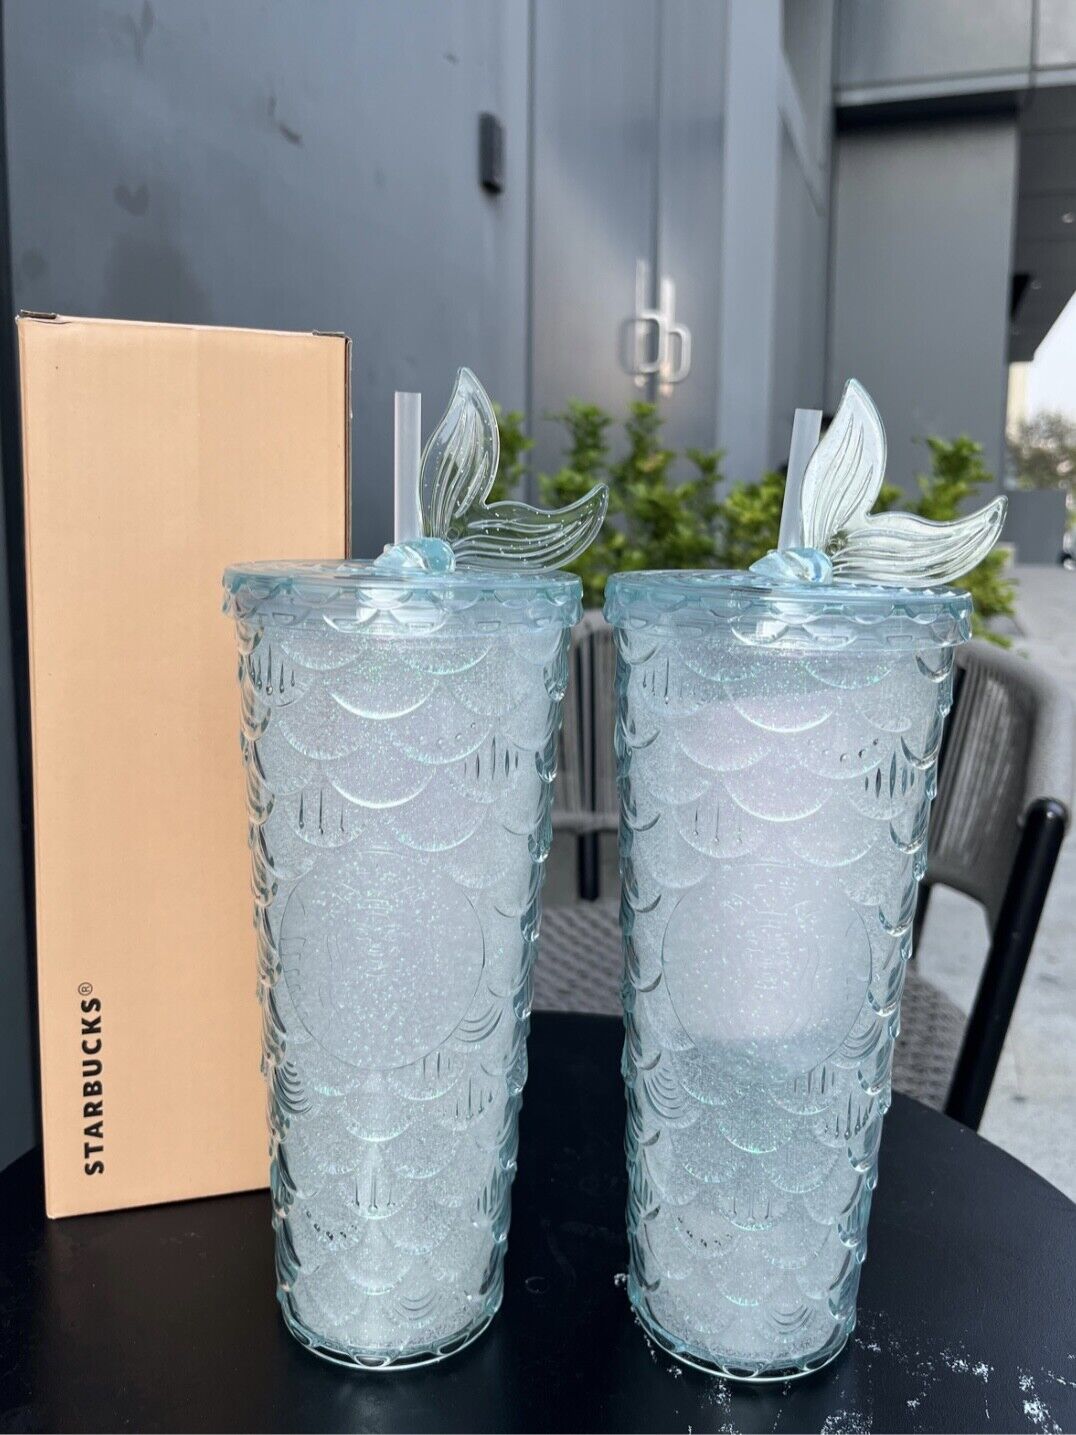 Starbucks Cup Shiny Light Blue Mermaid Fish Scale Straw 24oz Cold Cup Tumbler